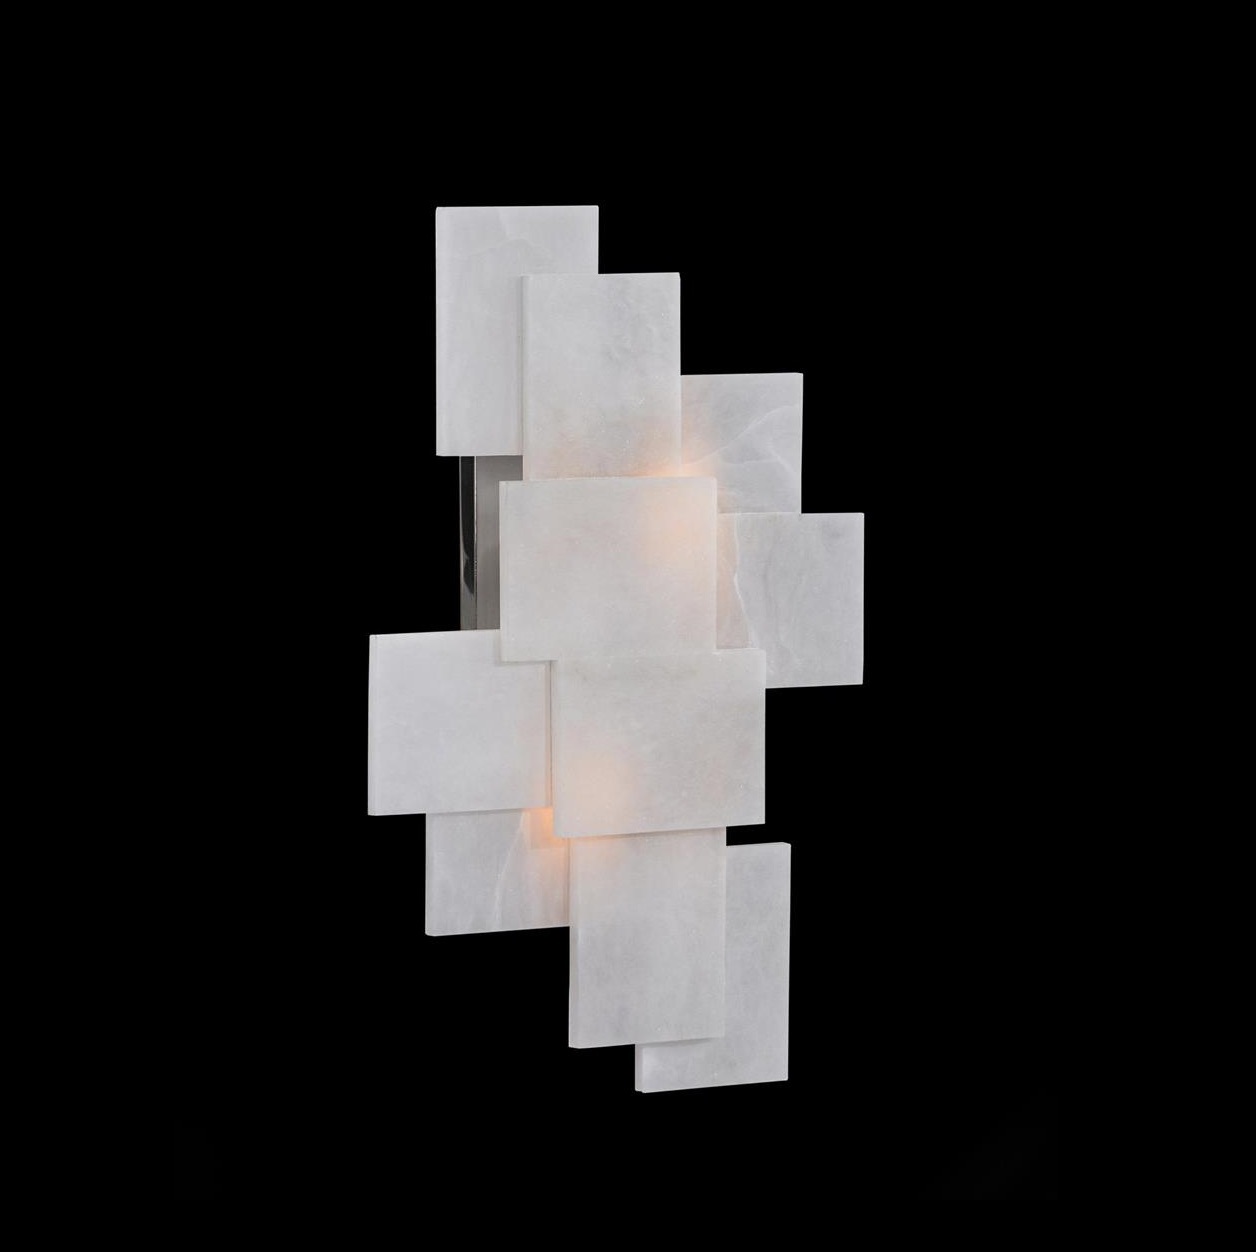 Alabaster Wall Sconce with a Nod to Mondrian, John Richard Wall Sconce, Brooklyn, New York, Furniture y ABD